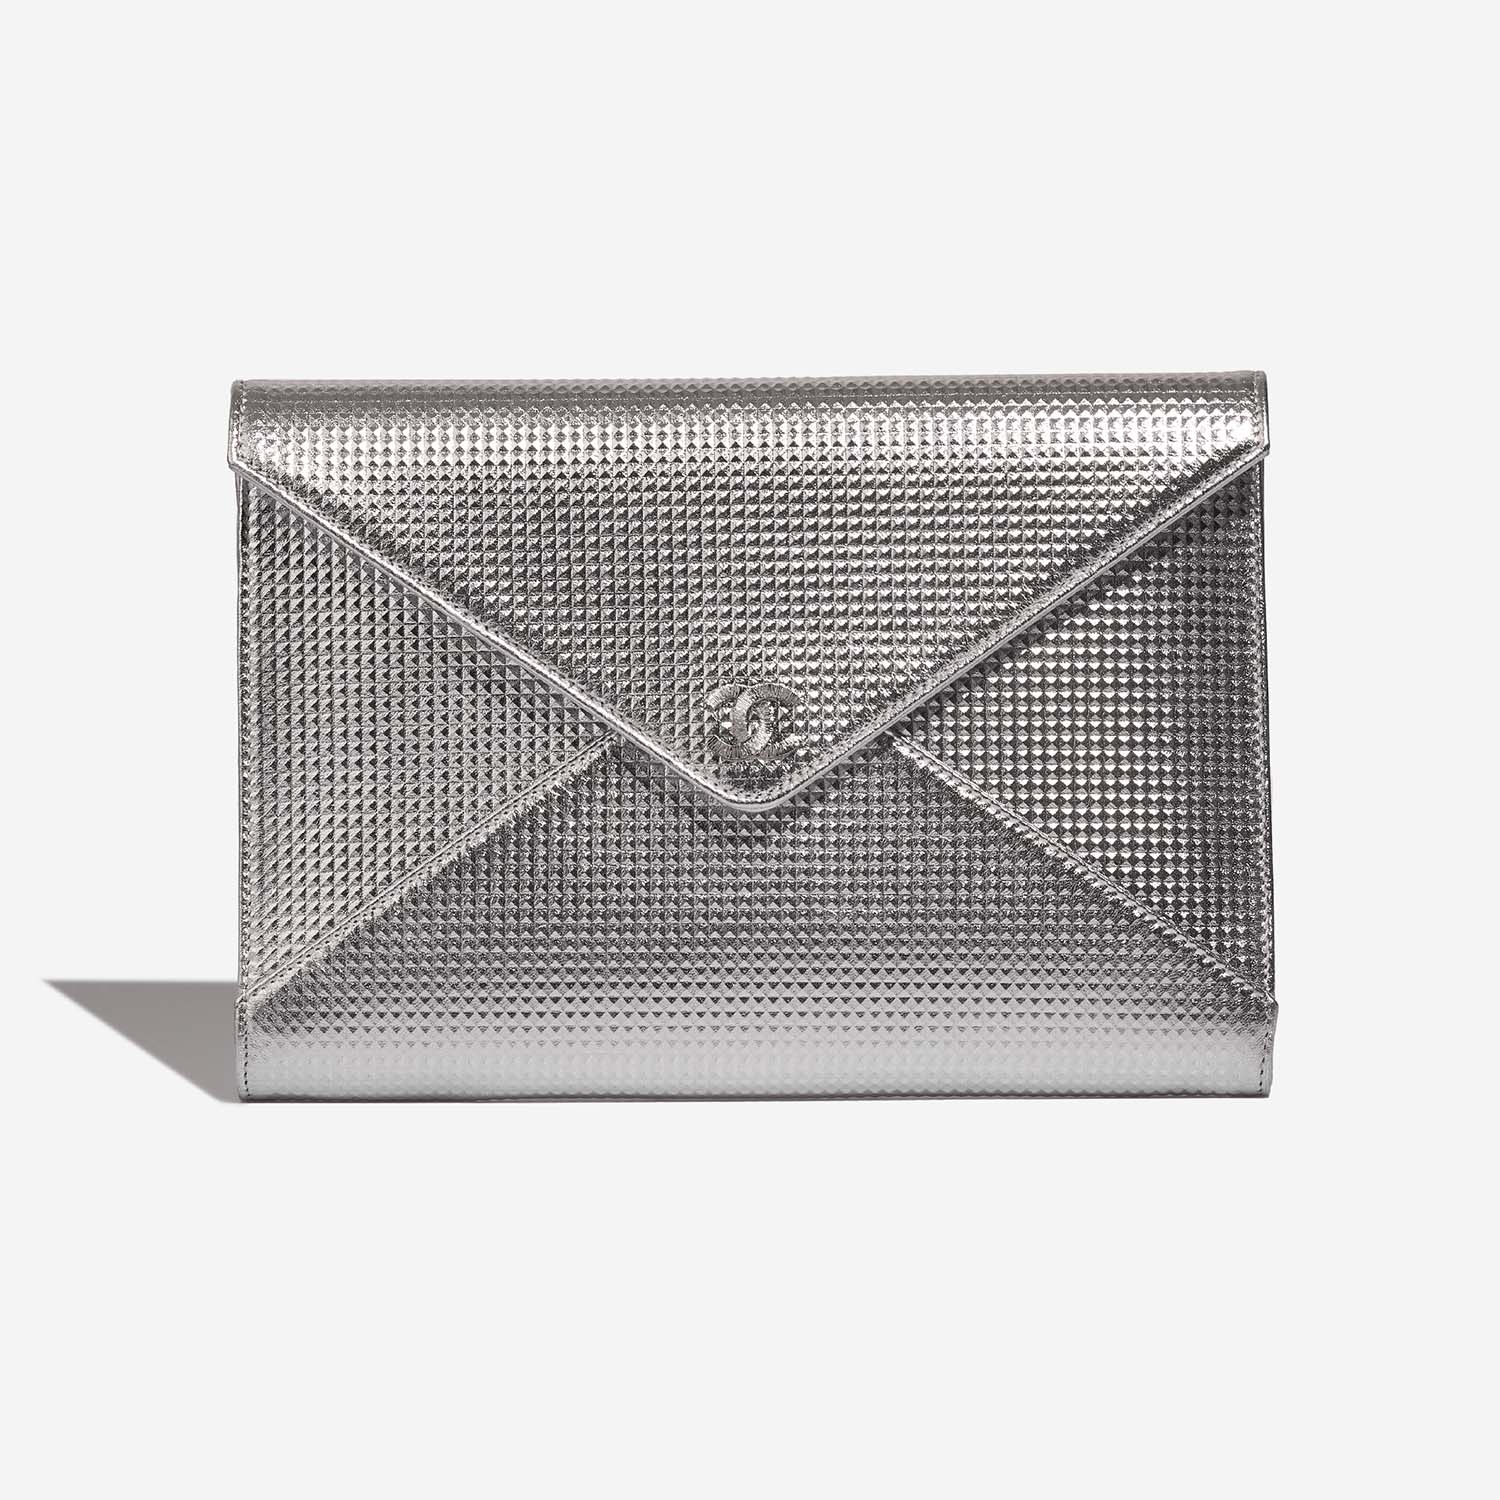 Shop Dune Women's Silver Clutch Bags up to 70% Off | DealDoodle